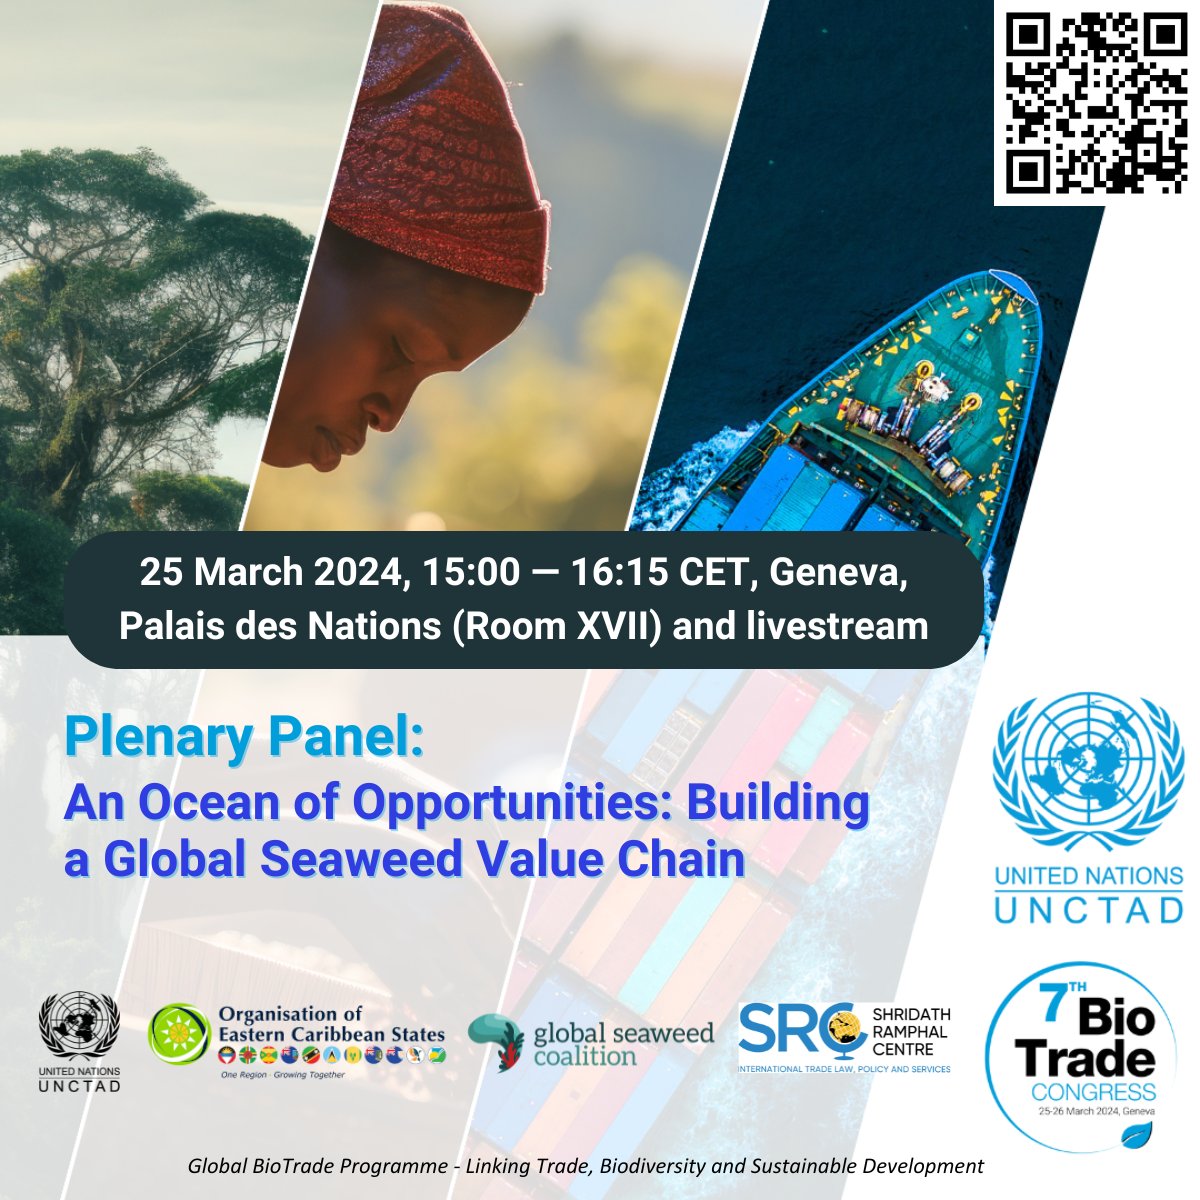 Now at the 7th BioTrade Congress: The panel comprising @OECS, @UNCTAD, @Safe_Seaweed, @notpla and University of West Indies focuses on emerging seaweed industry and its contribution to #biodiversity conservation. Register and join the discussions online: bit.ly/BioTrade-Congr…